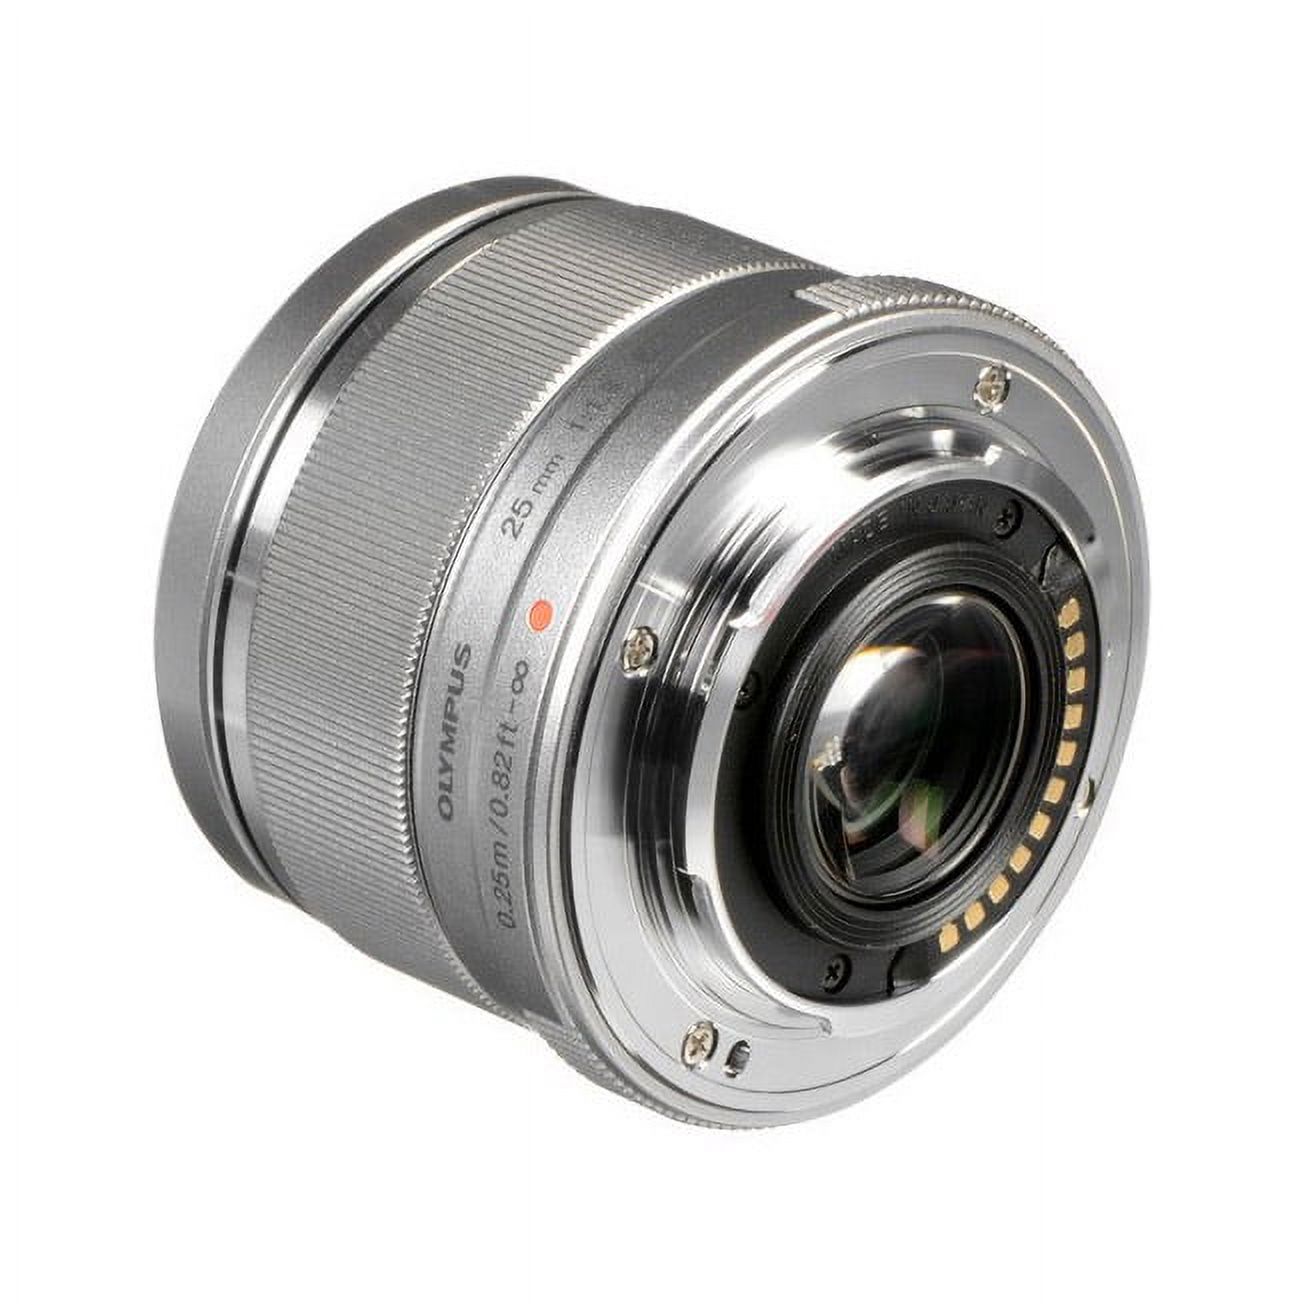 Olympus M.Zuiko Digital 25mm F1.8 Lens, for Micro Four Thirds Cameras (Silver) - image 2 of 2